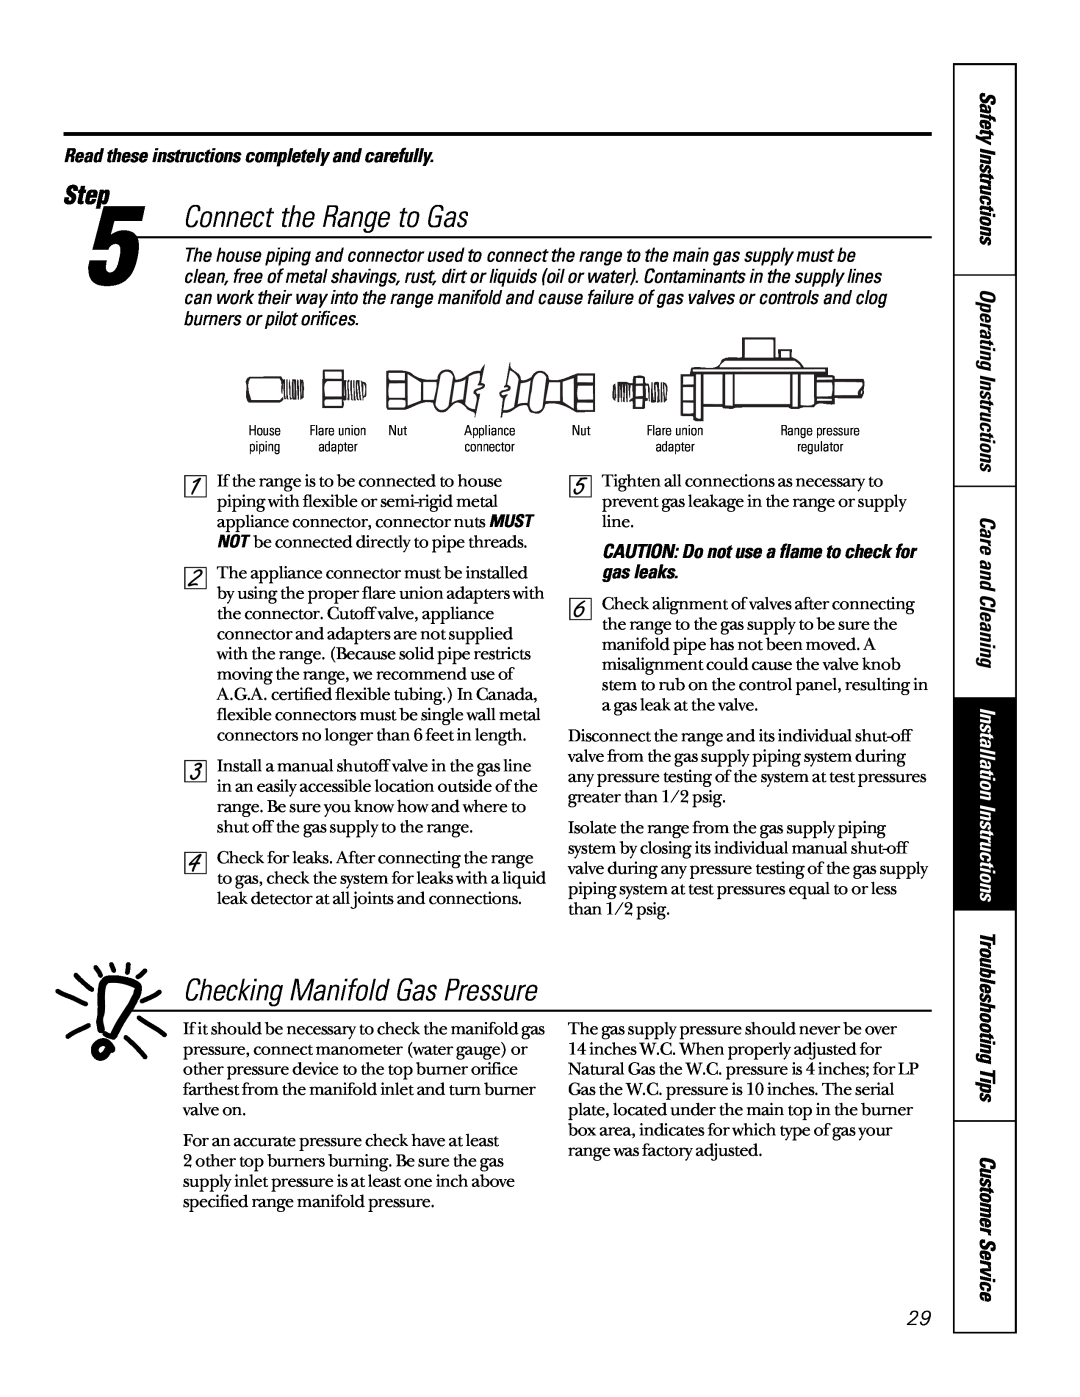 GE 164D3333P185-1 Connect the Range to Gas, Checking Manifold Gas Pressure, Care and Cleaning Installation Instructions 